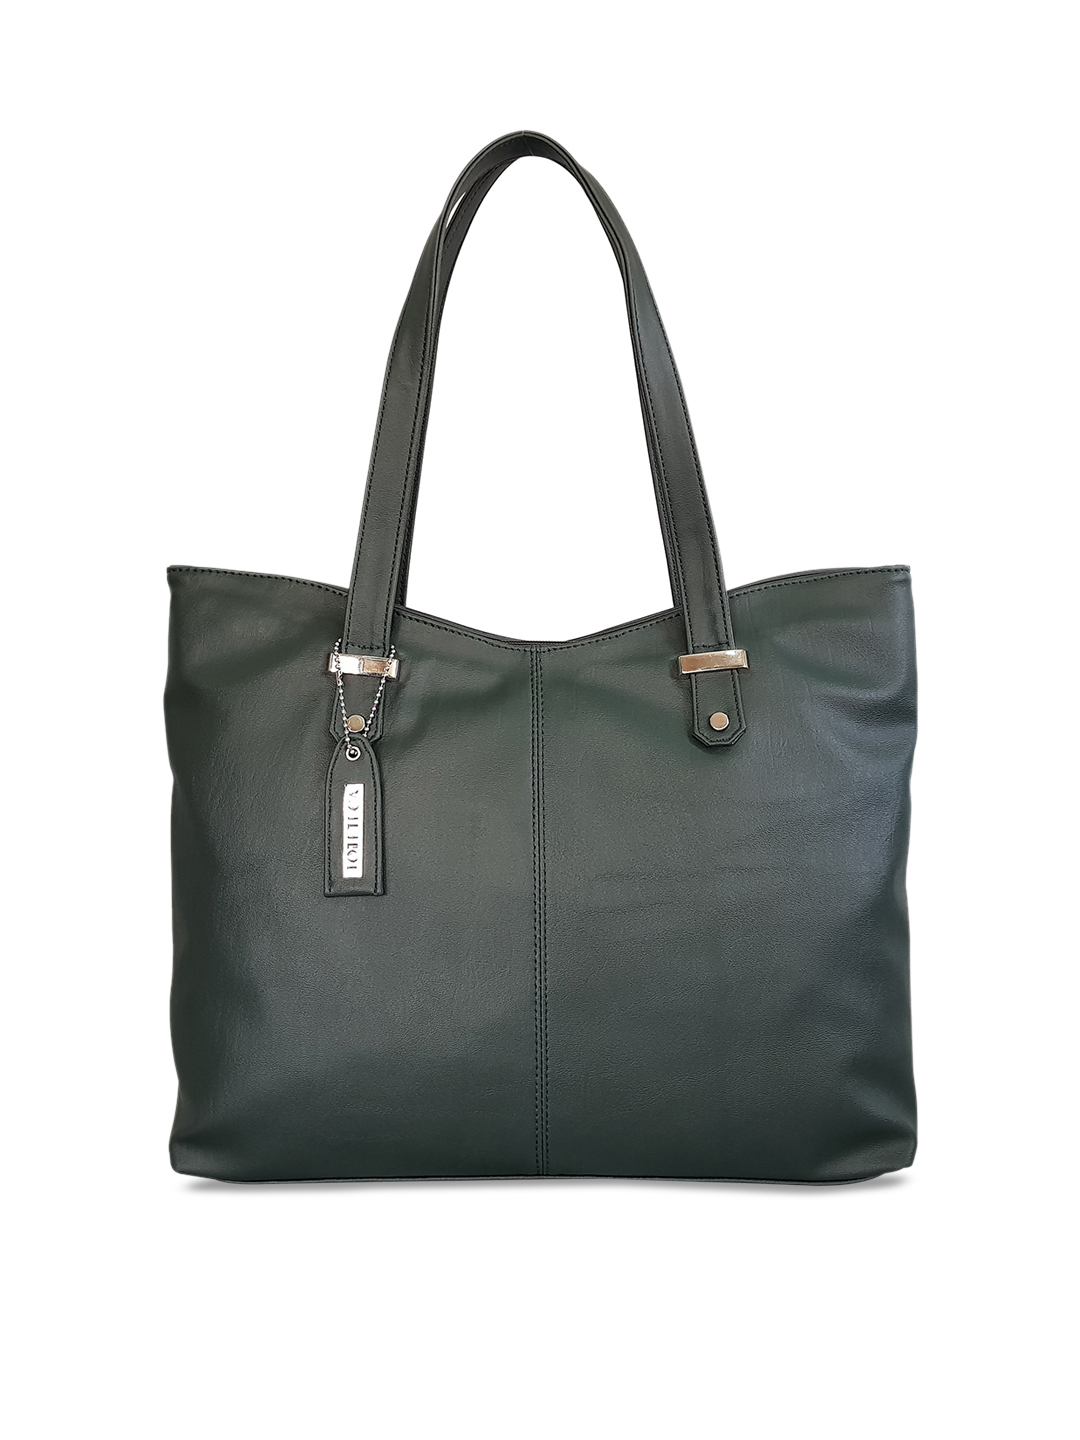 Myntra Offers – Toteteca Green Solid Shoulder Bag @ Rs. 599